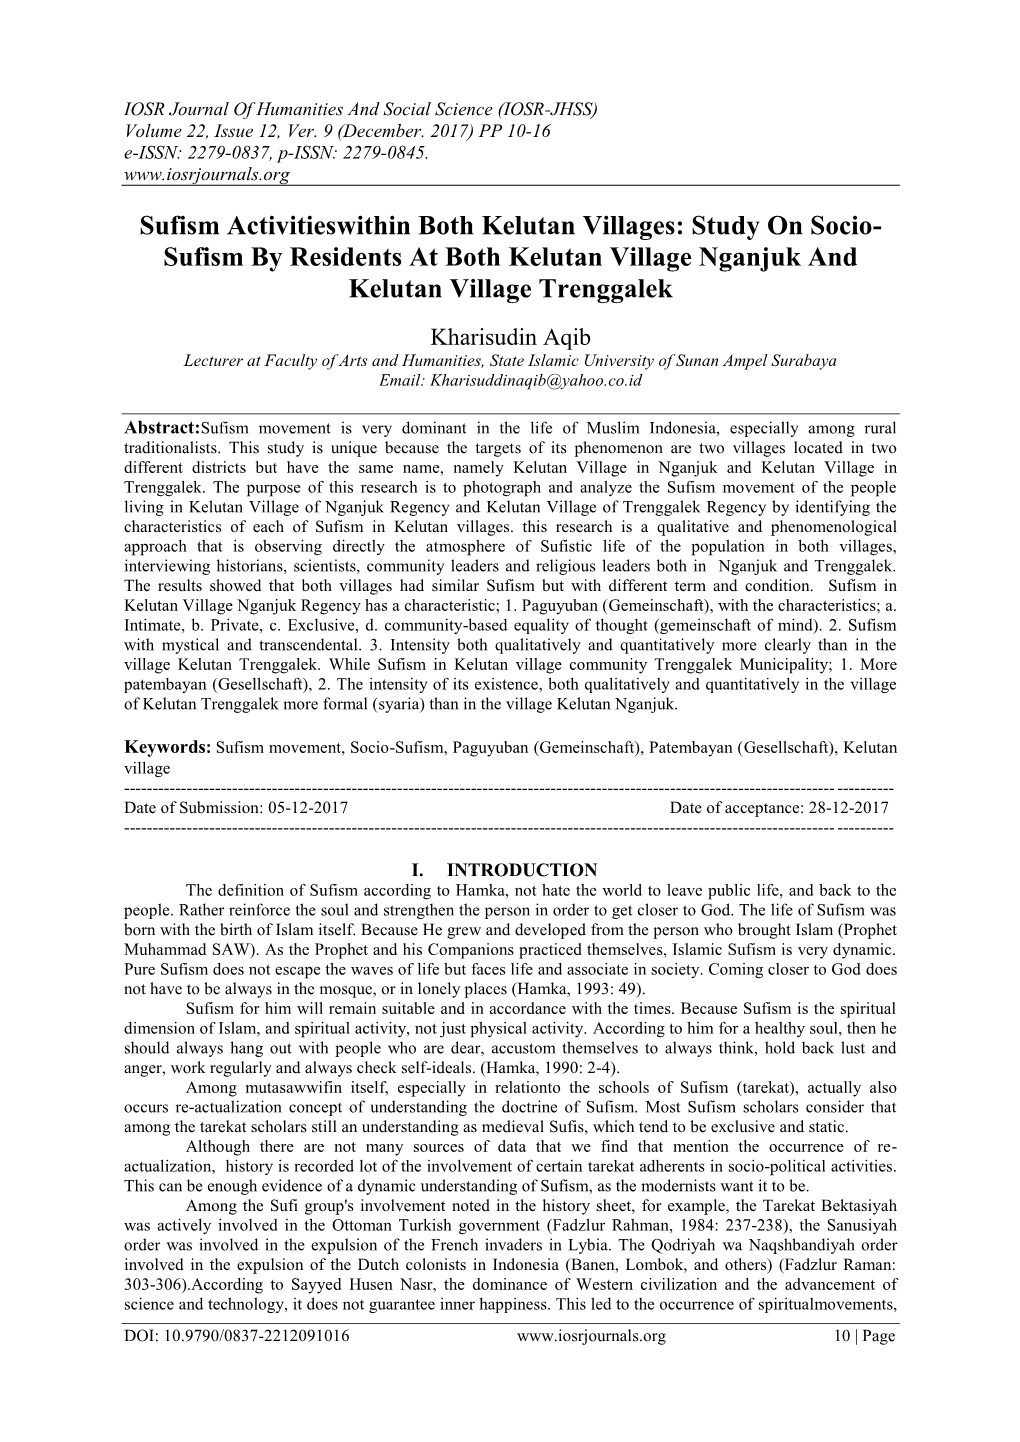 Sufism Activitieswithin Both Kelutan Villages: Study on Socio- Sufism by Residents at Both Kelutan Village Nganjuk and Kelutan Village Trenggalek